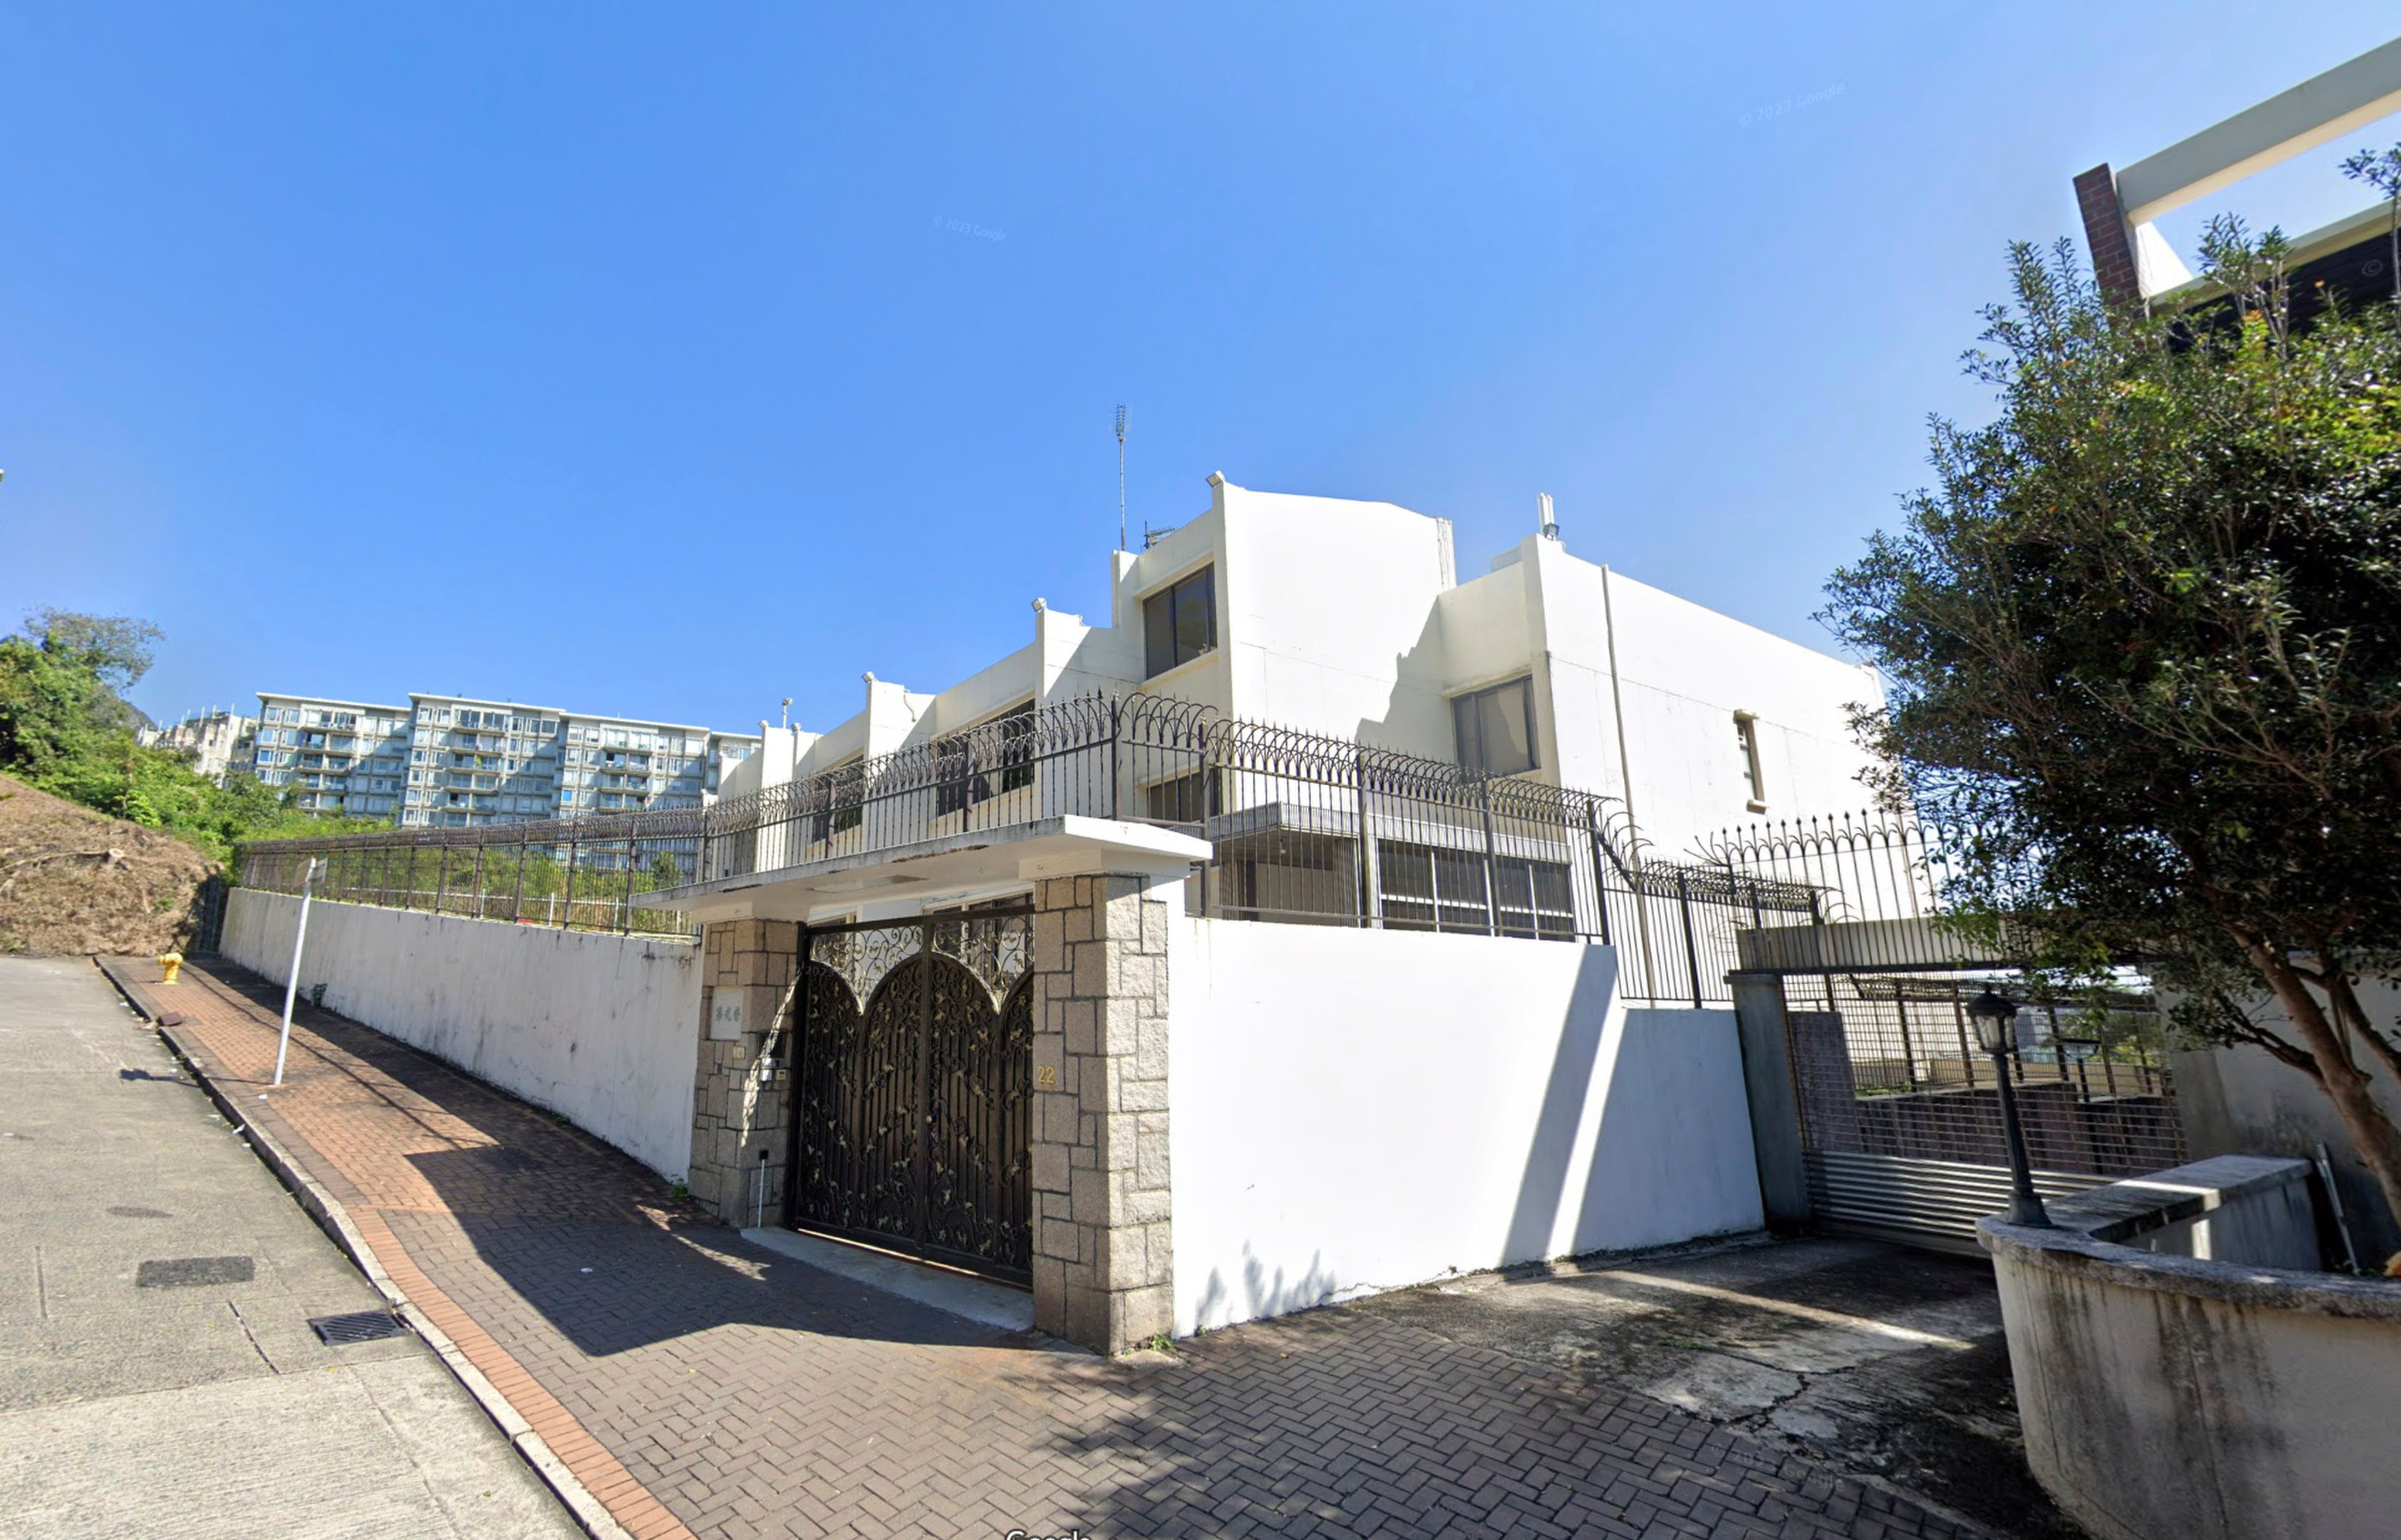 The married couple lived in a luxury home in Kowloon Tong. Photo: Google